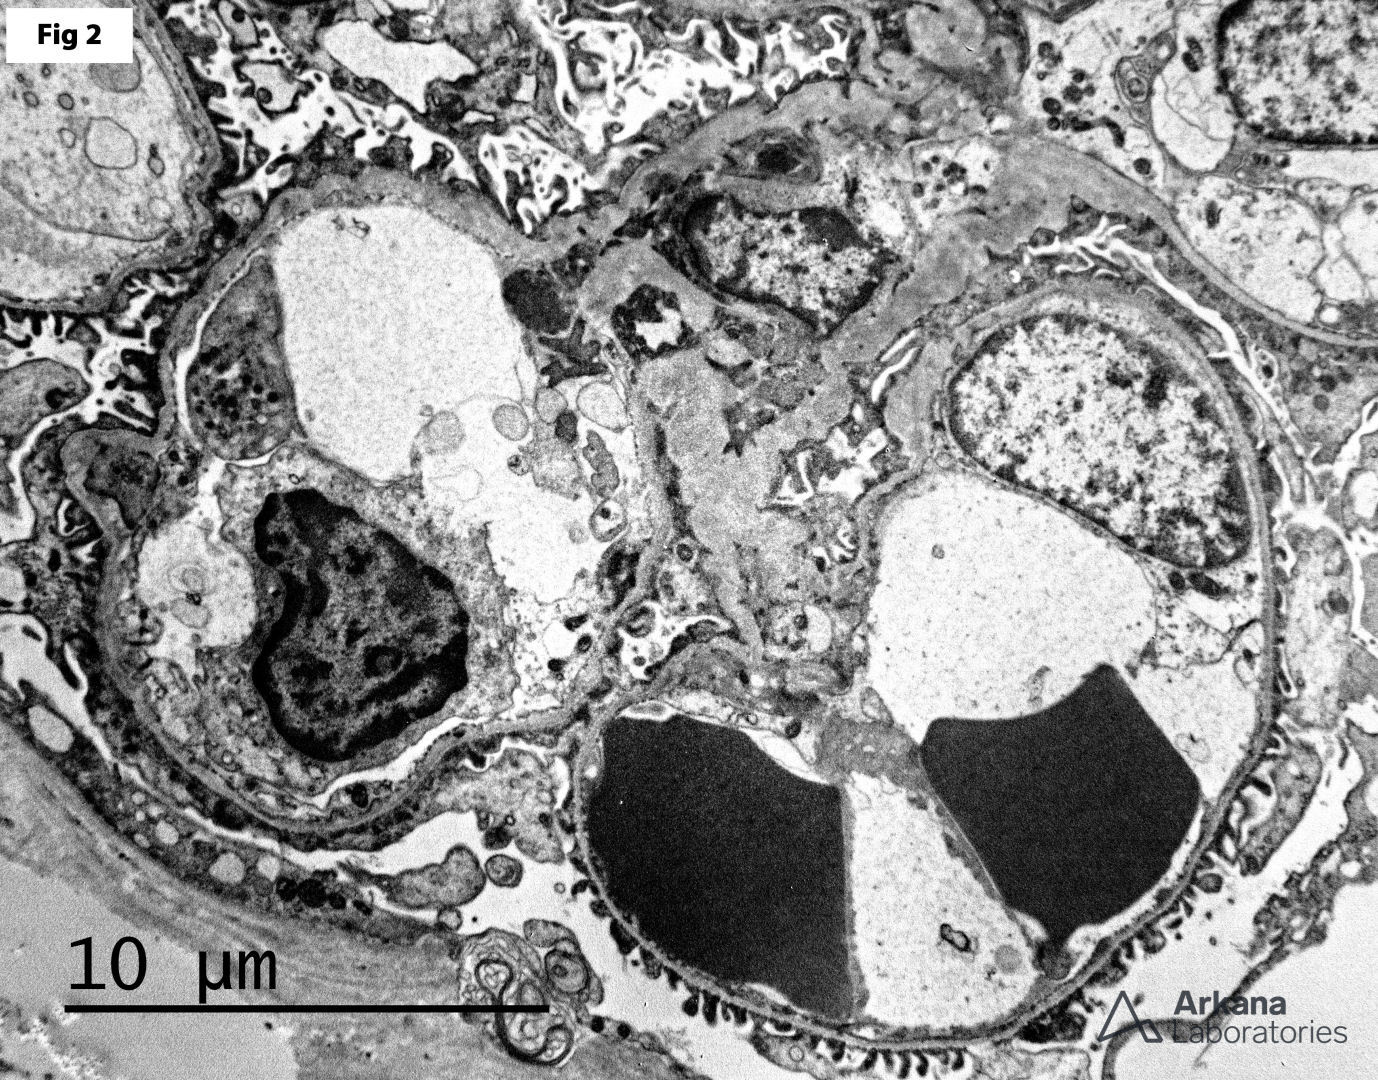 uniform thinning of the glomerular basement membranes by electron microscopy